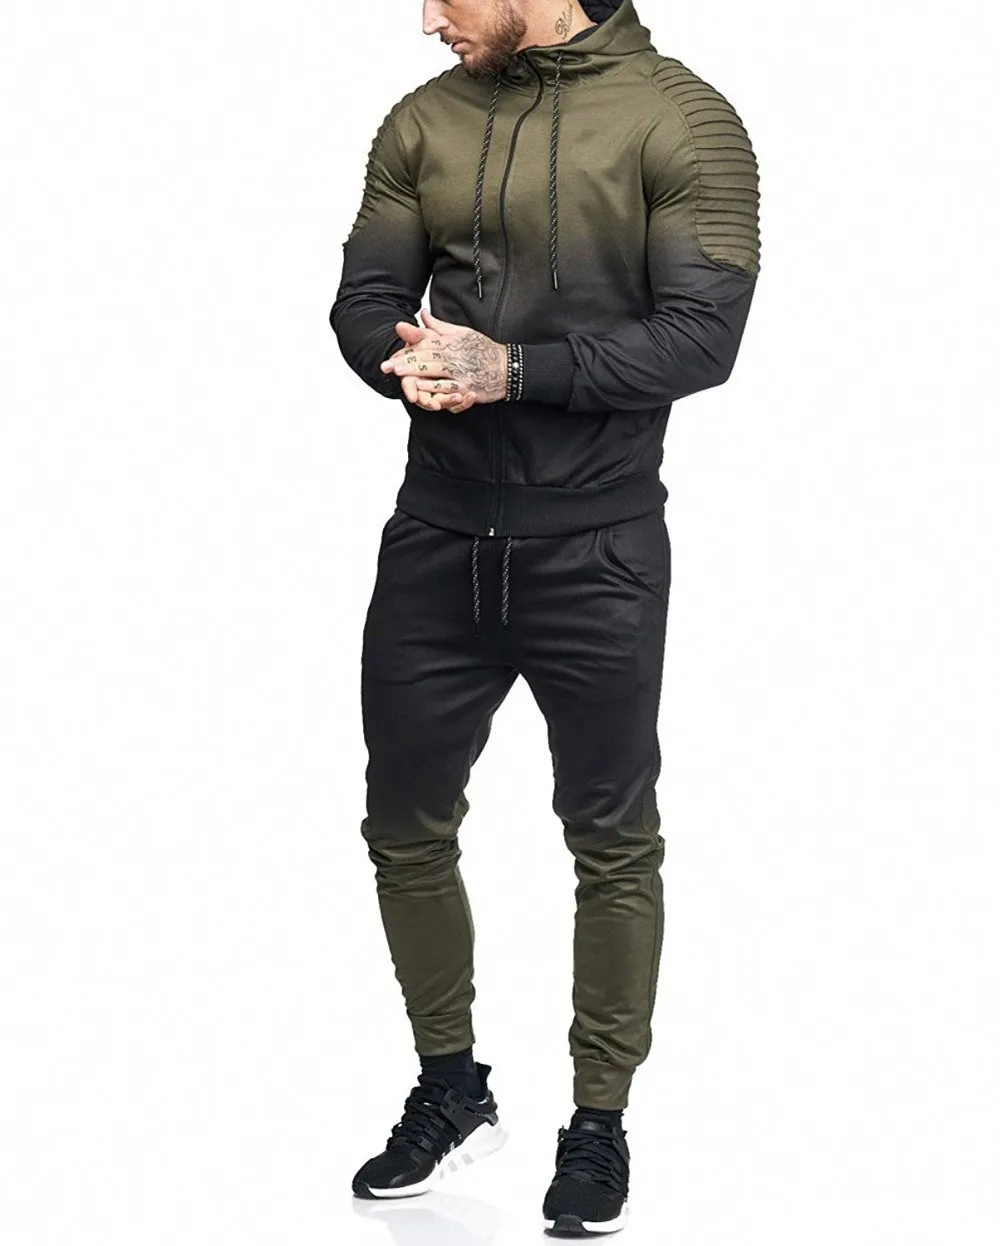 Wholesale Sport Gym Wear Muscle Mens Tracksuit - Buy Matching ...